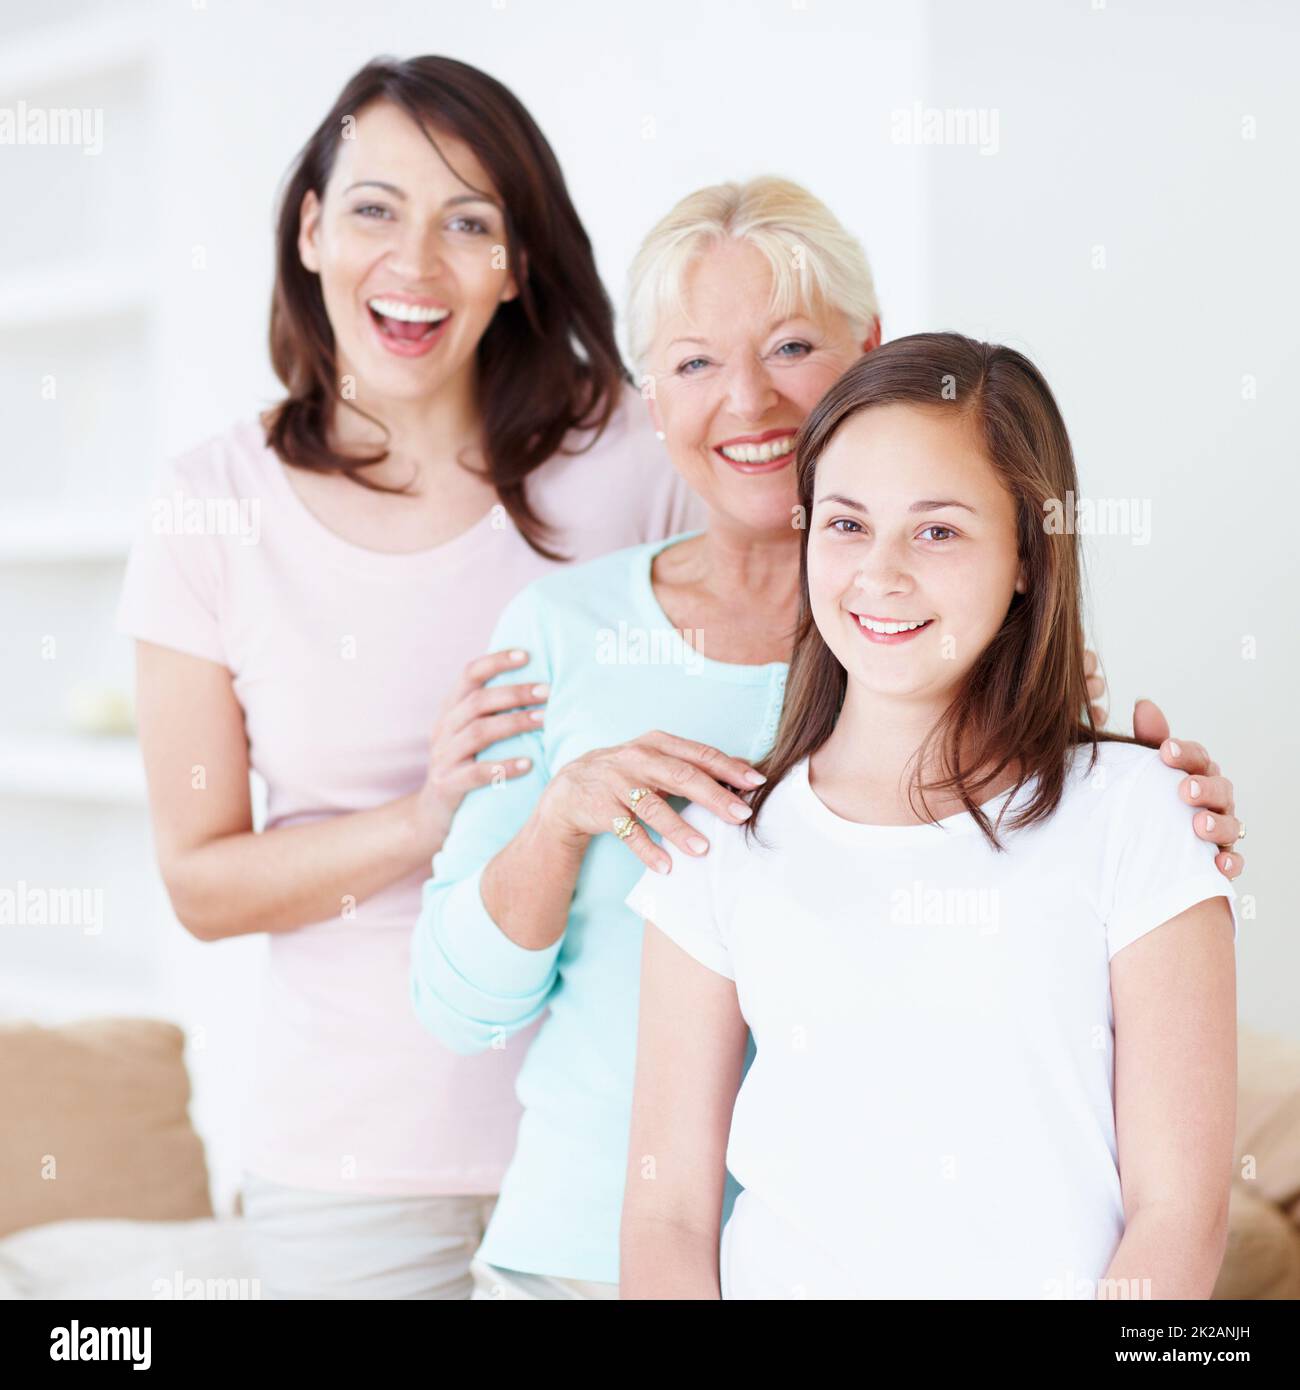 Lining up for love and laughter. Portrait of a granddaughter, mother and grandmother laughing happily while holding one another in a line. Stock Photo